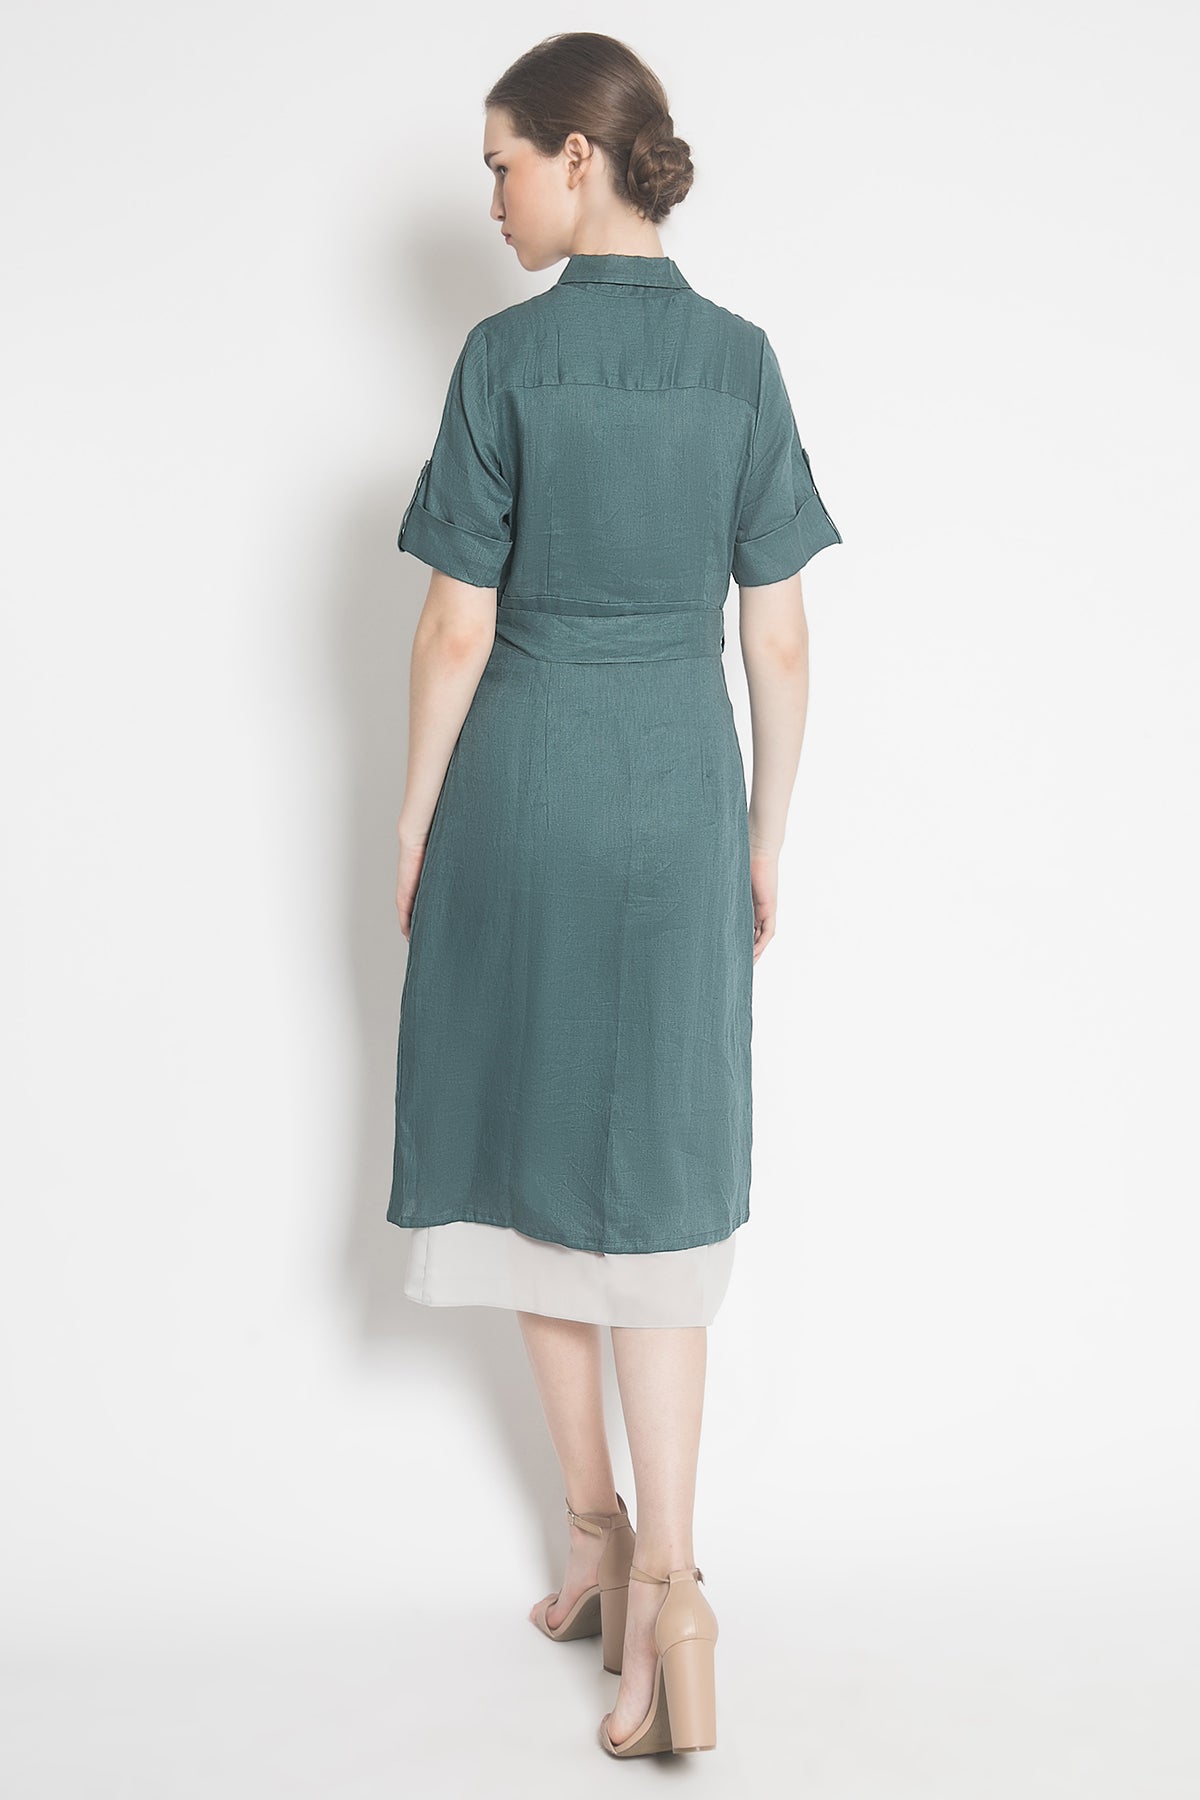 Linen Dress in Turquoise Green